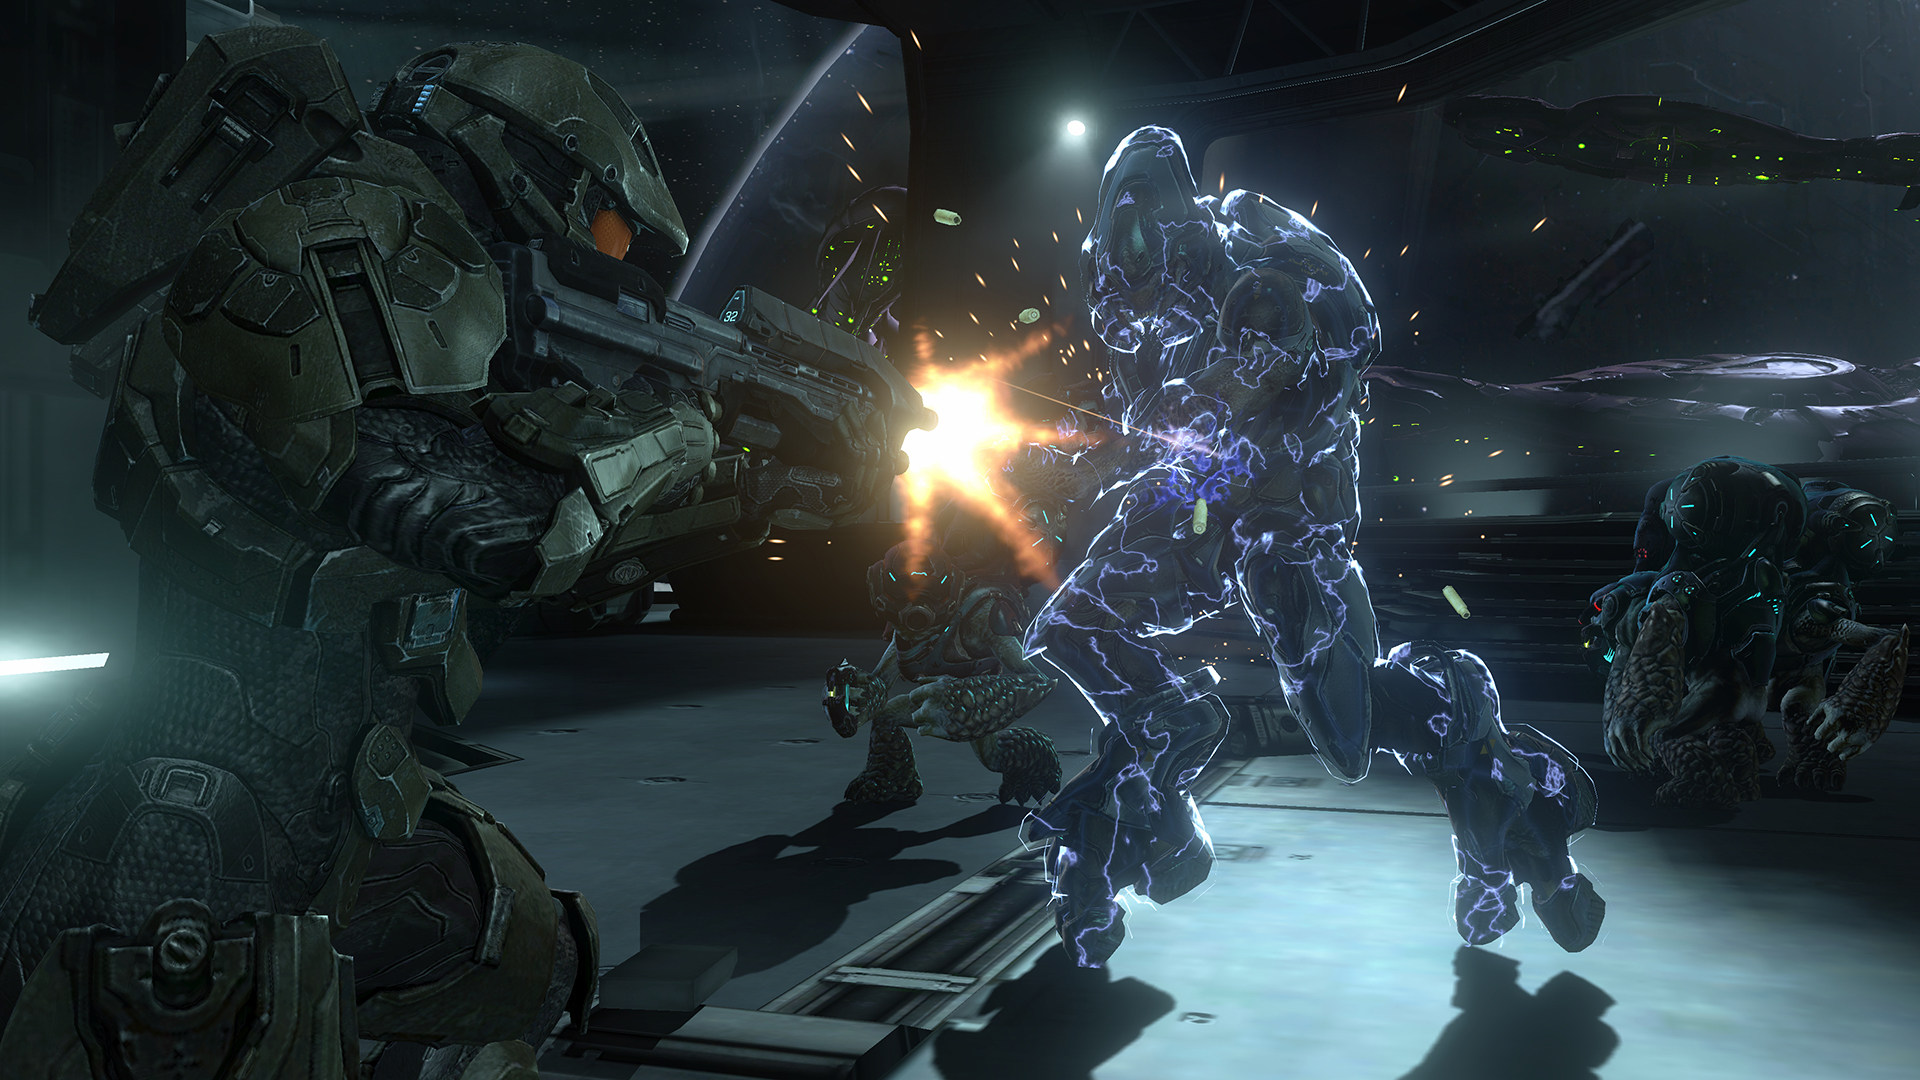 play halo 3 online now